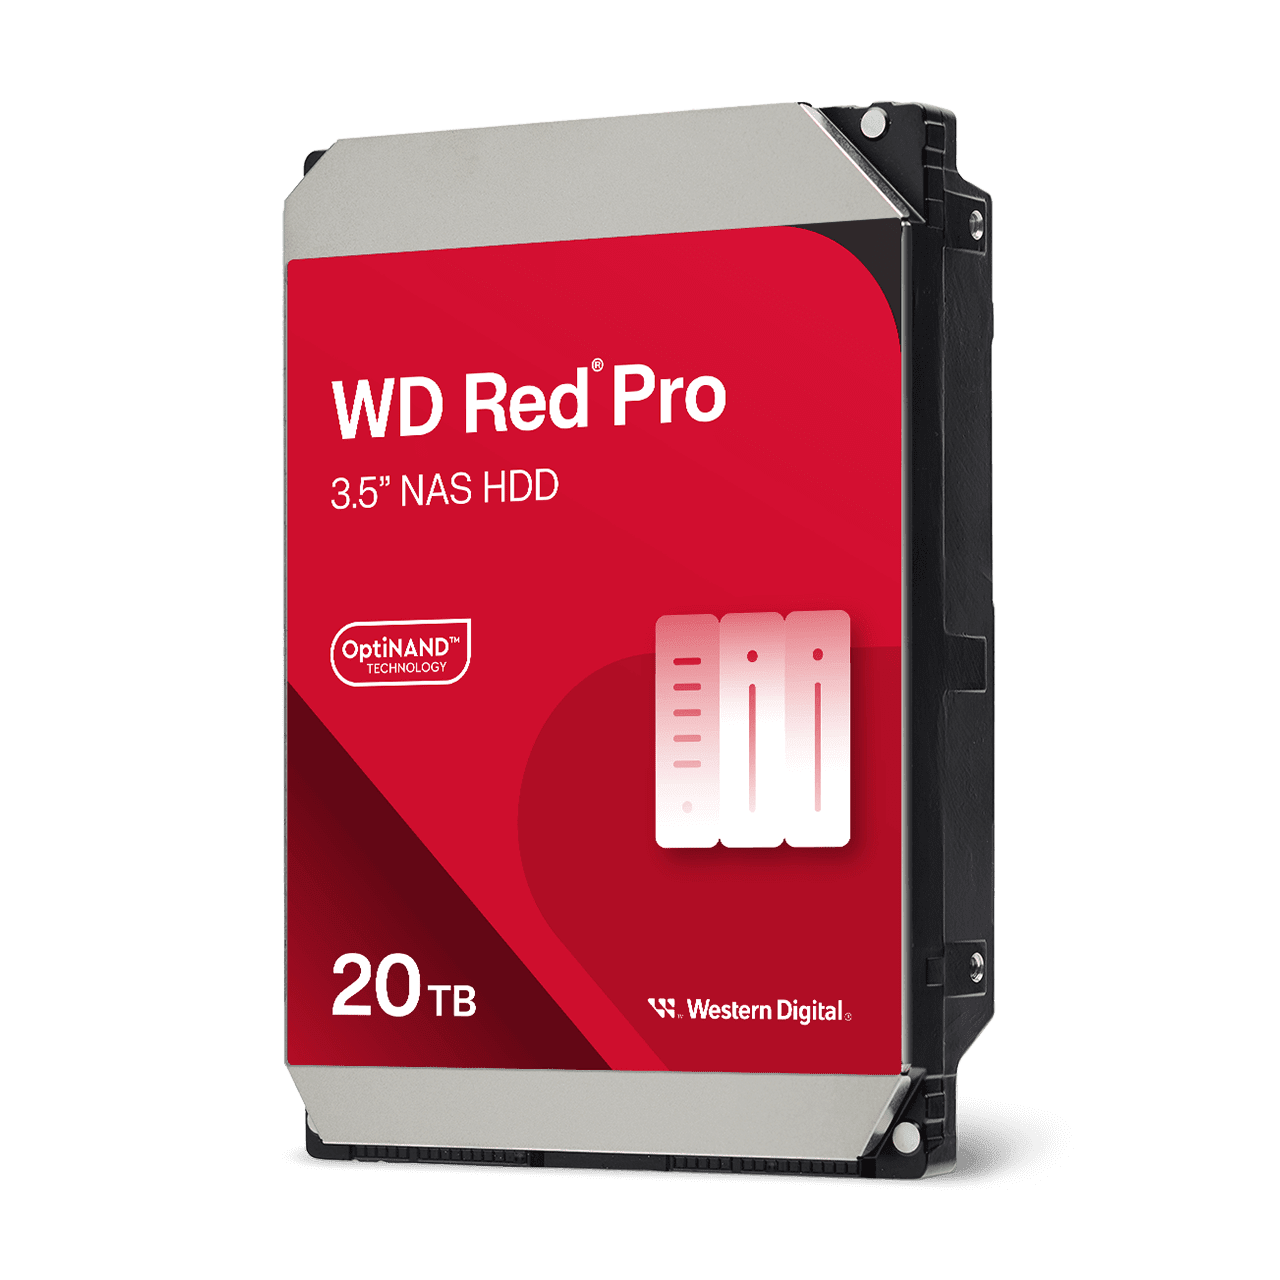 WD Red™ Pro 20TB NAS Hard Drive - Image10